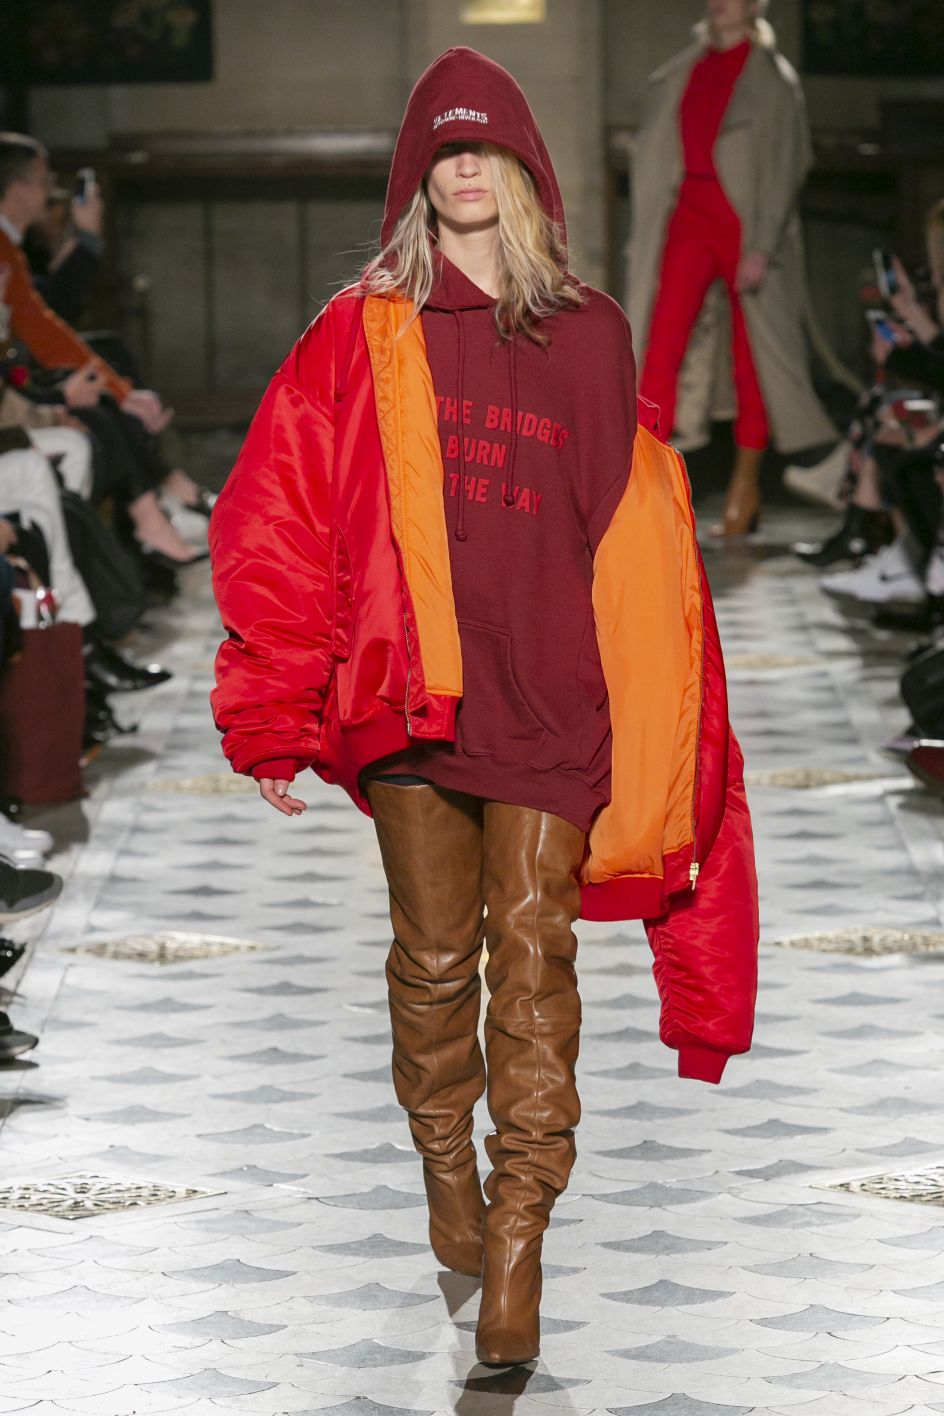 VETEMENTS Ready to Wear, Autumn/Winter 2016. Photo credit: Gio Staiano